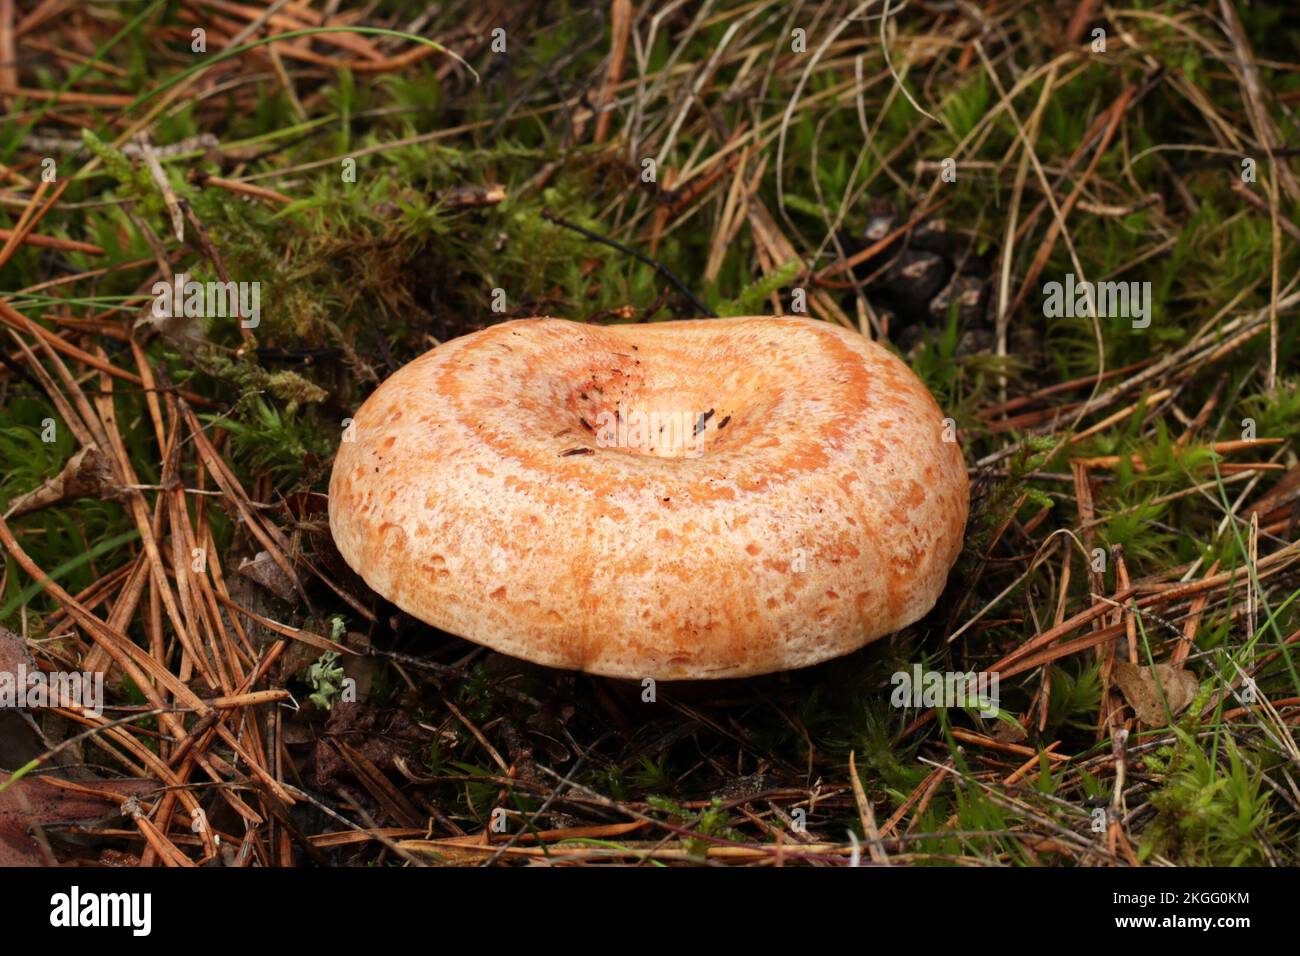 The wild edible mushroom Lactarius deliciosus grows in the forest. Сommonly known as the saffron milk cap and red pine mushroom. Stock Photo